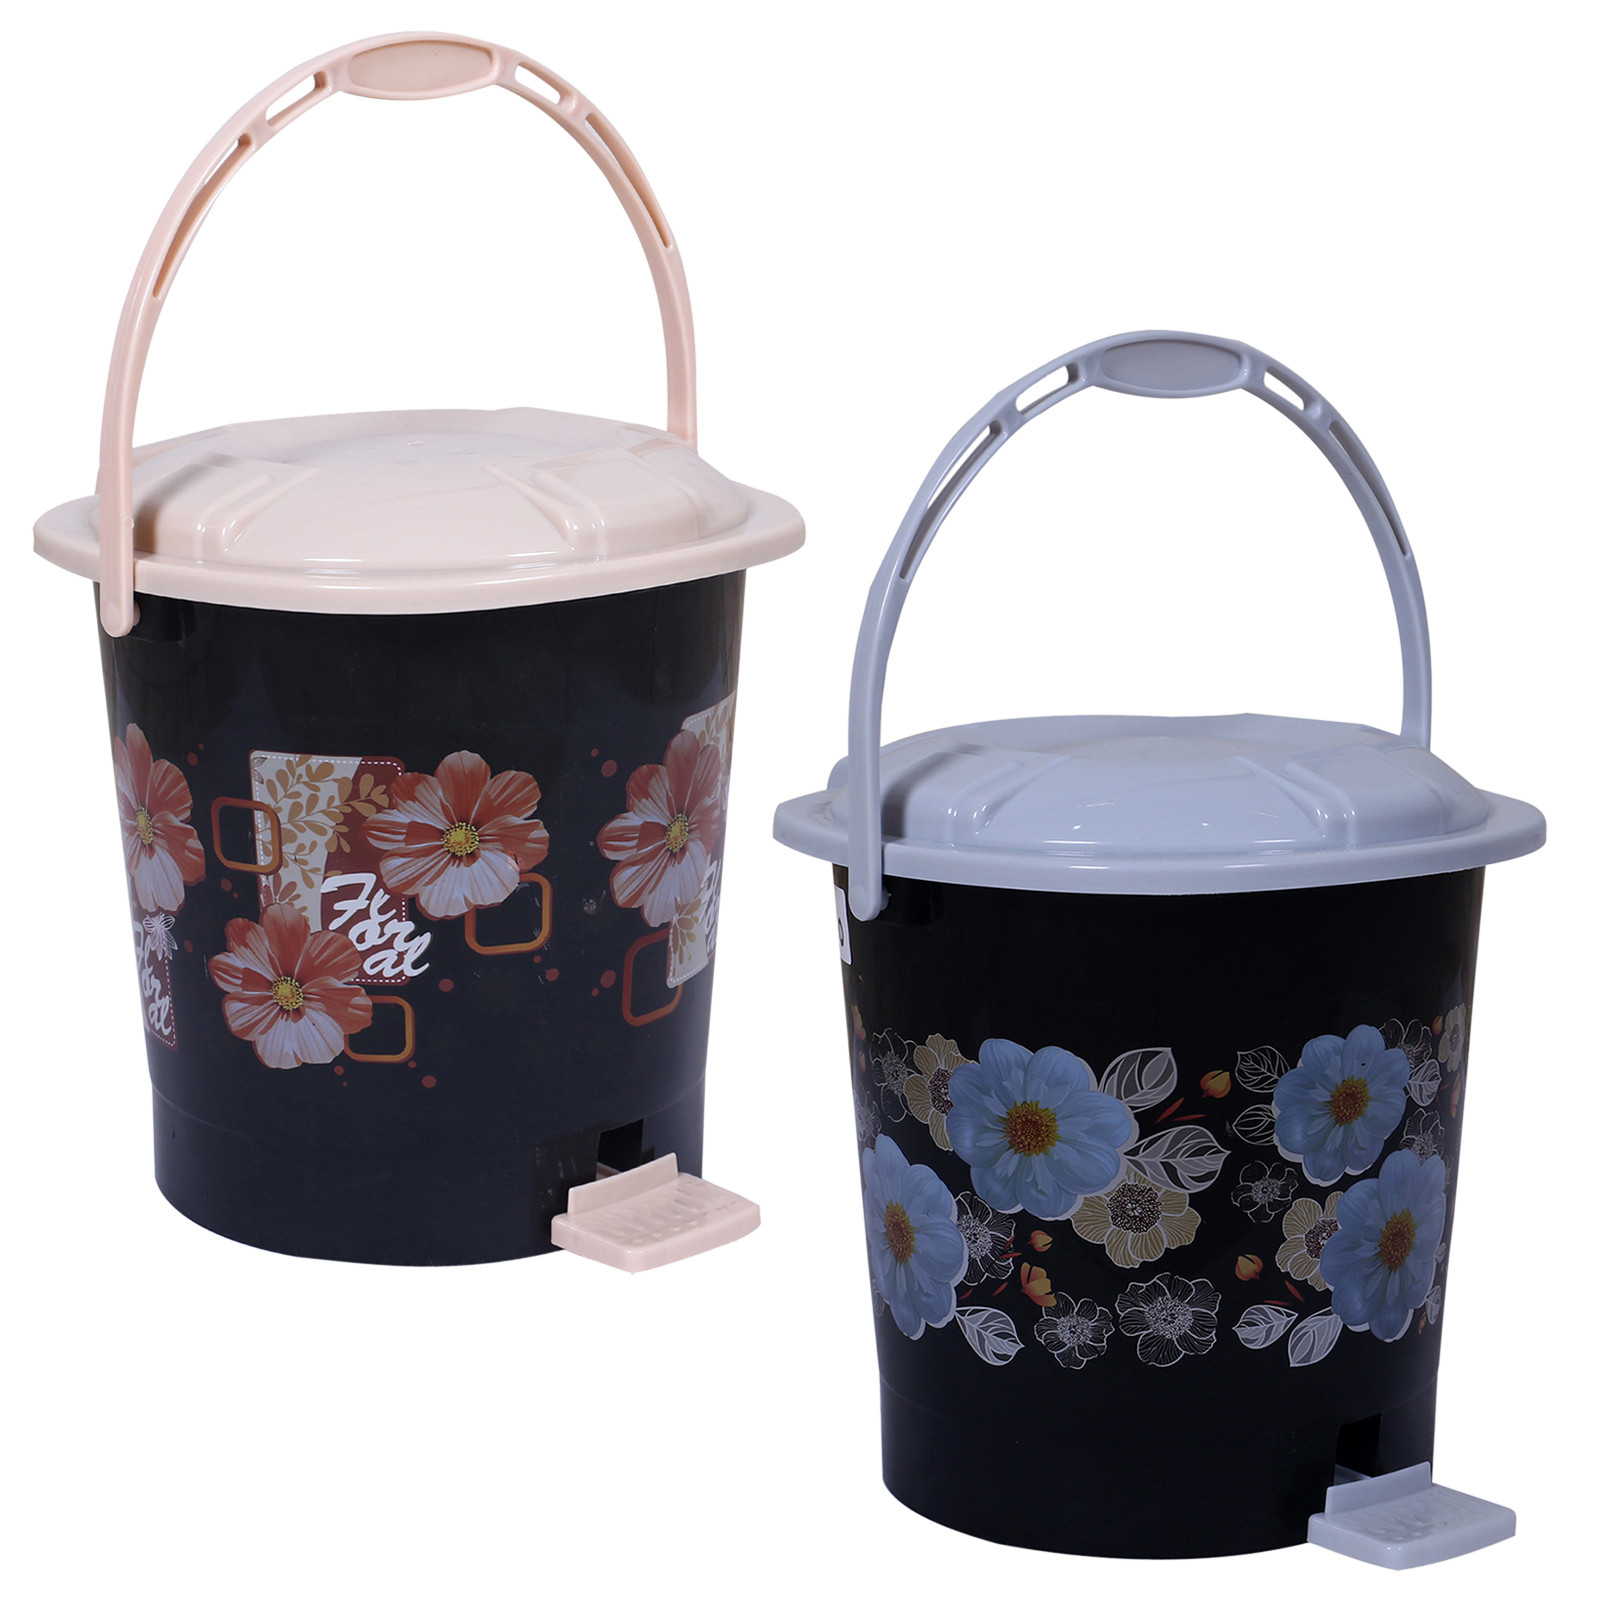 Kuber Industries Durable Floral & Flower Print Plastic Pedal Dustbin|Waste Bin|Trash Can For Kitchen & Home With Handle,7 Litre,Pack of 2 (Black)